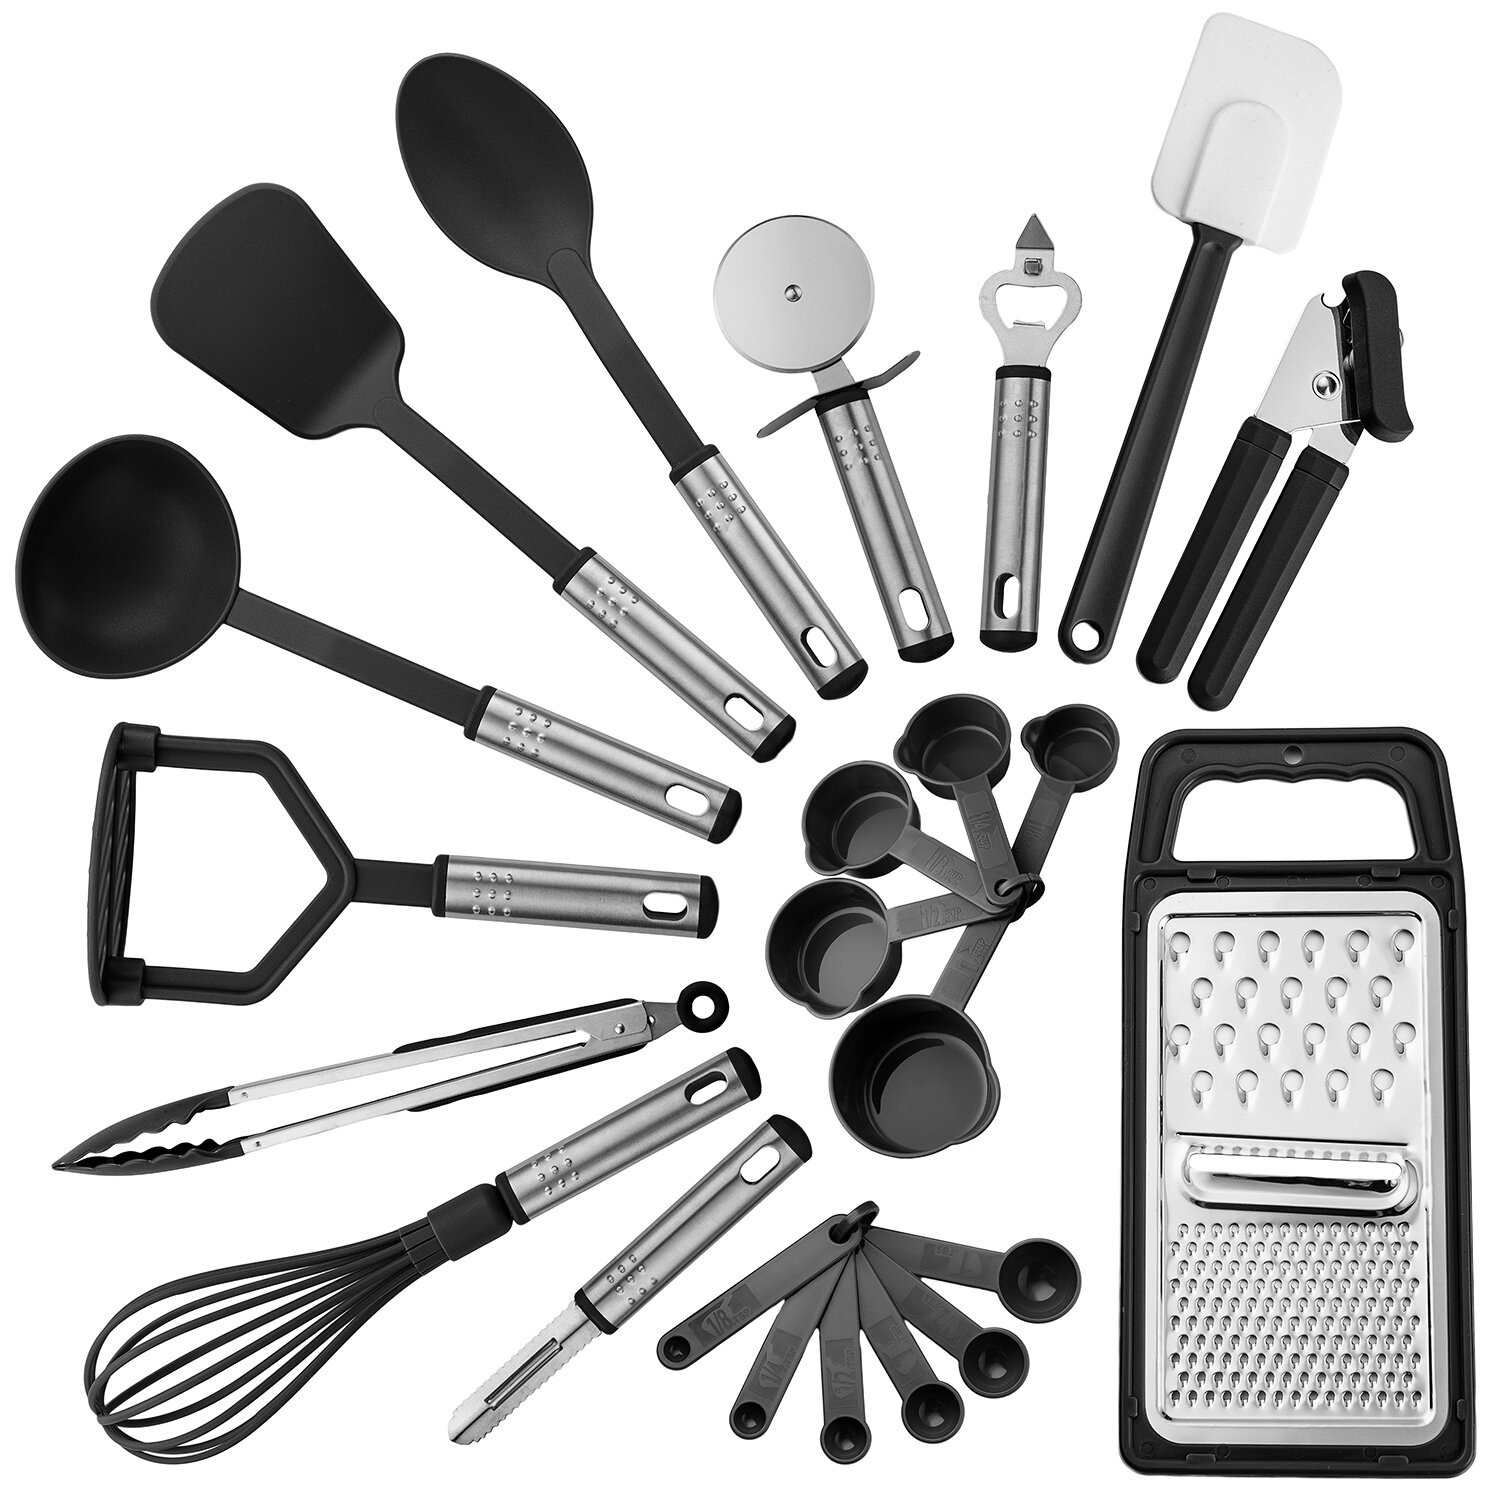 Cuisinart 6pc Stainless Steel/Nylon Essential Tools and Gadgets Set Black